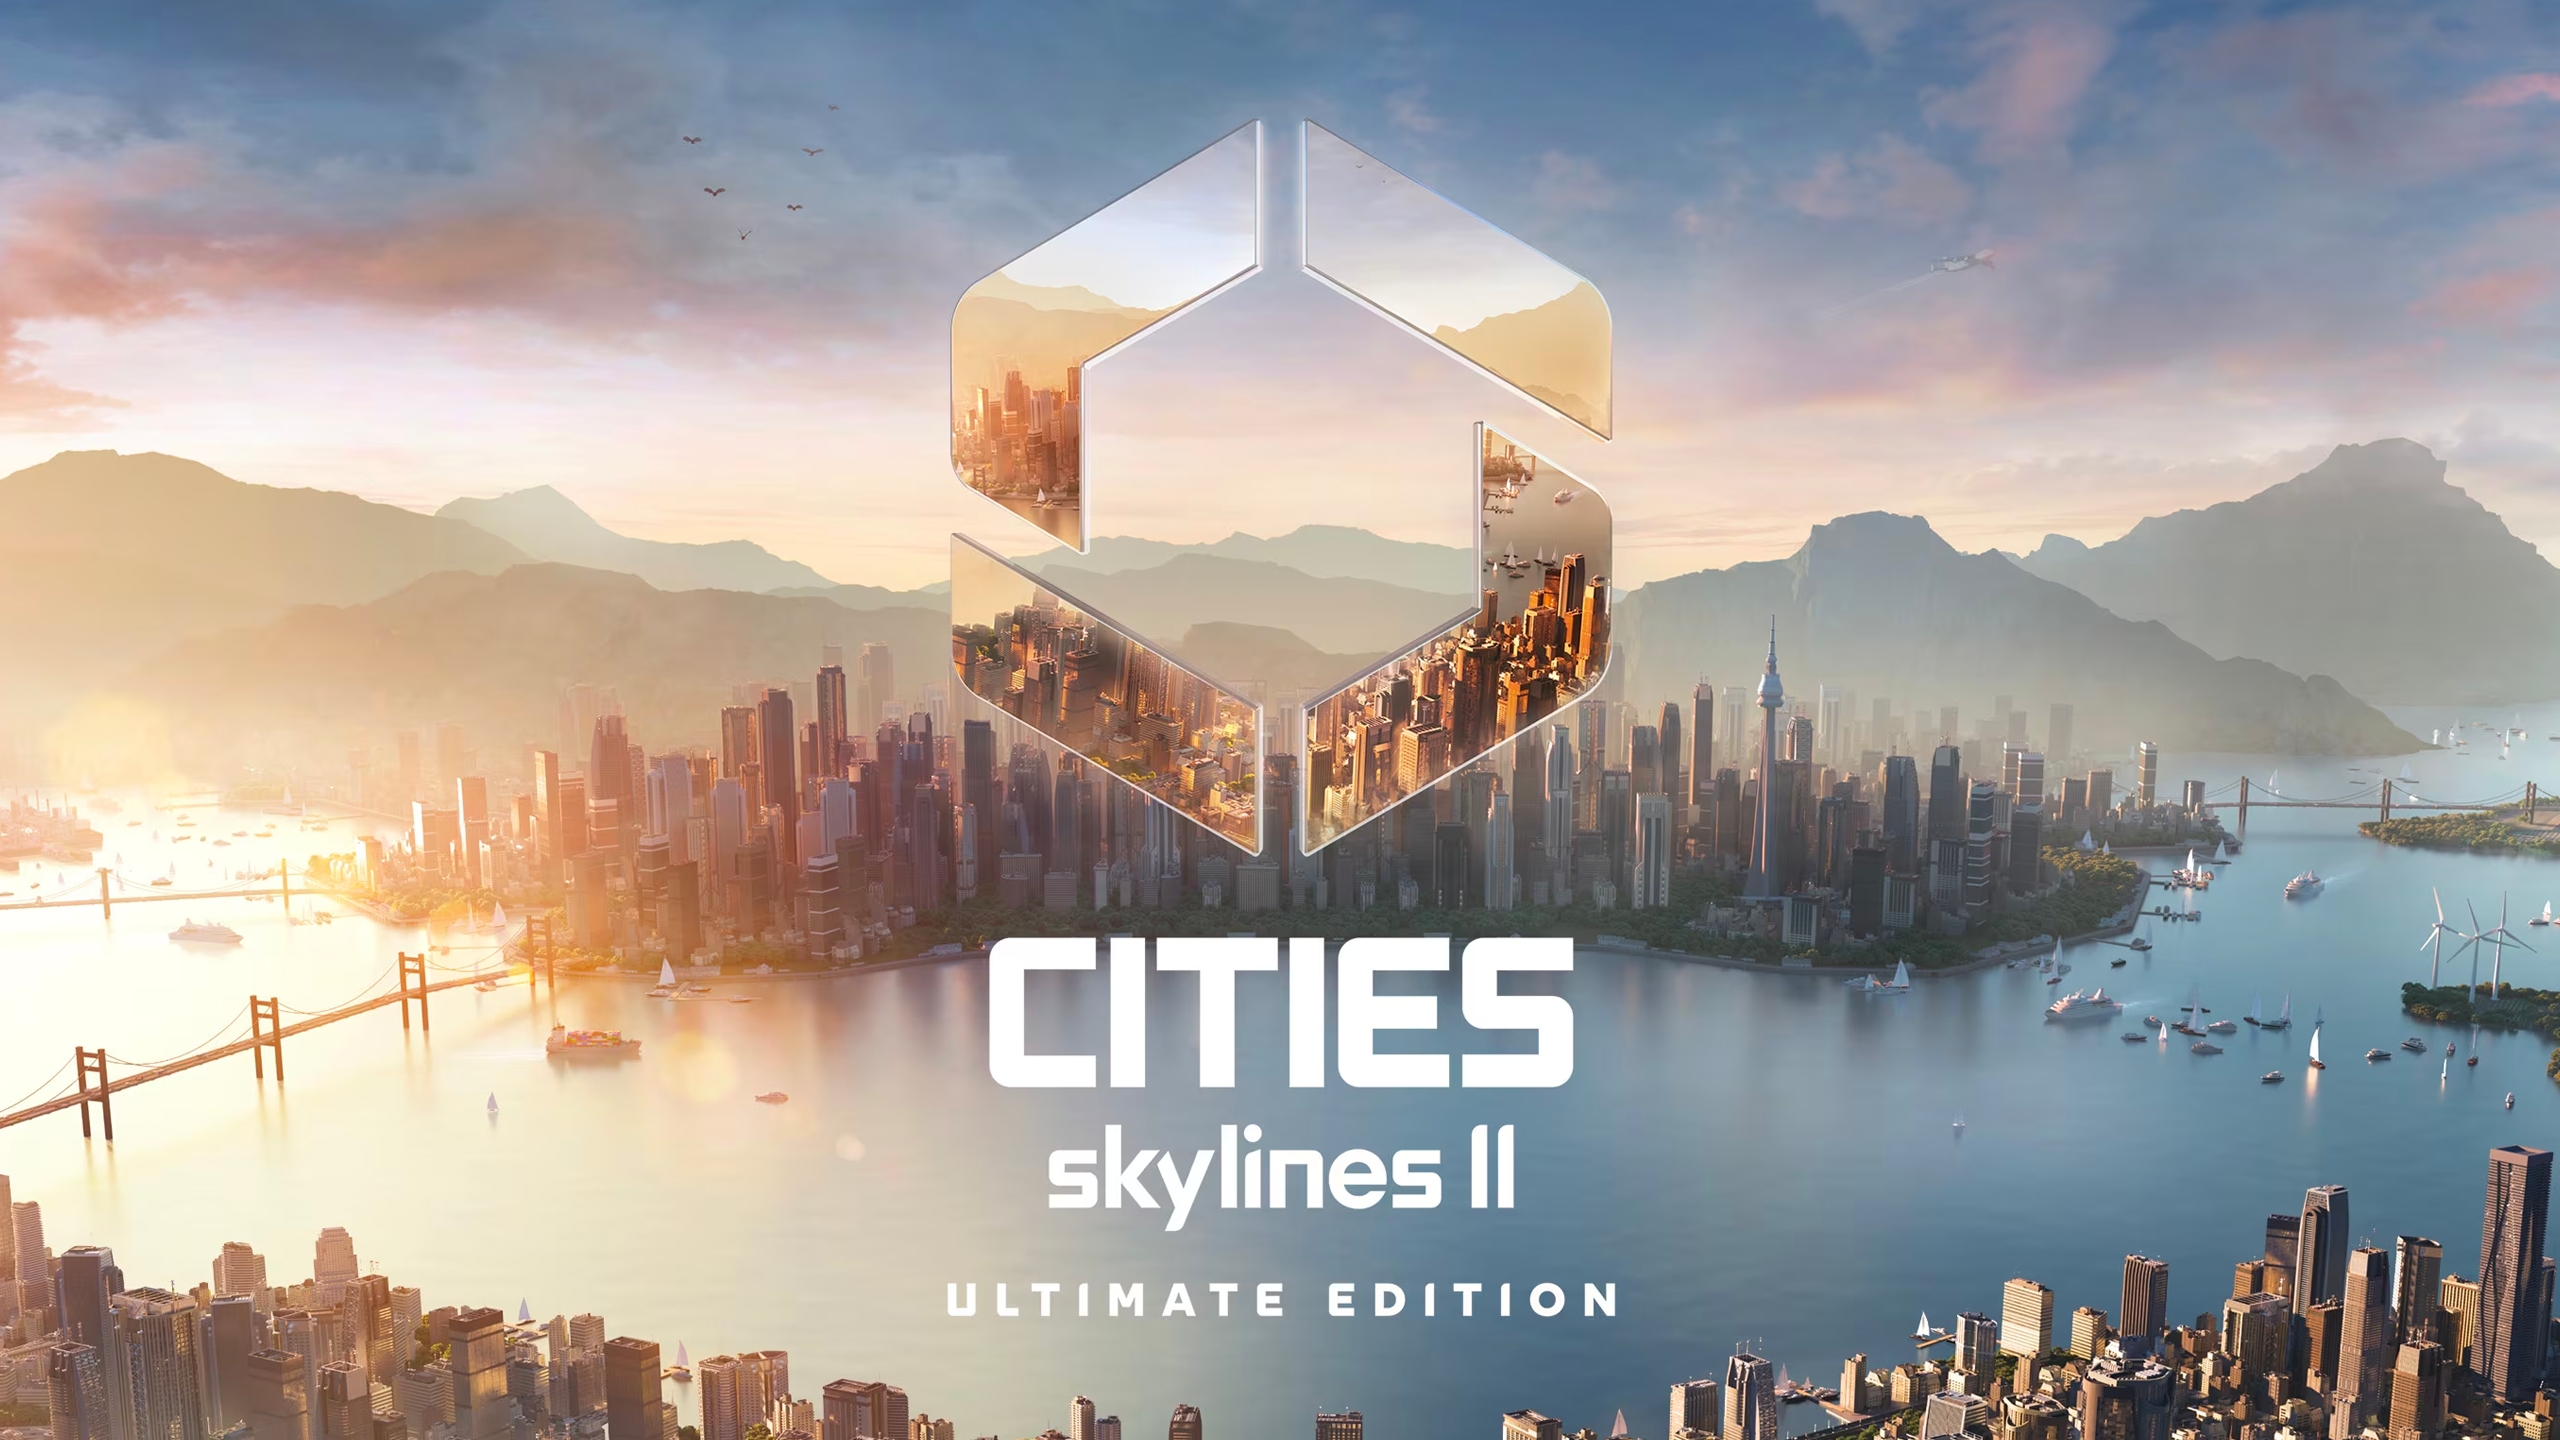 CITIES SKYLINES:2 GAMEPLAY - Building an Airport - Live from